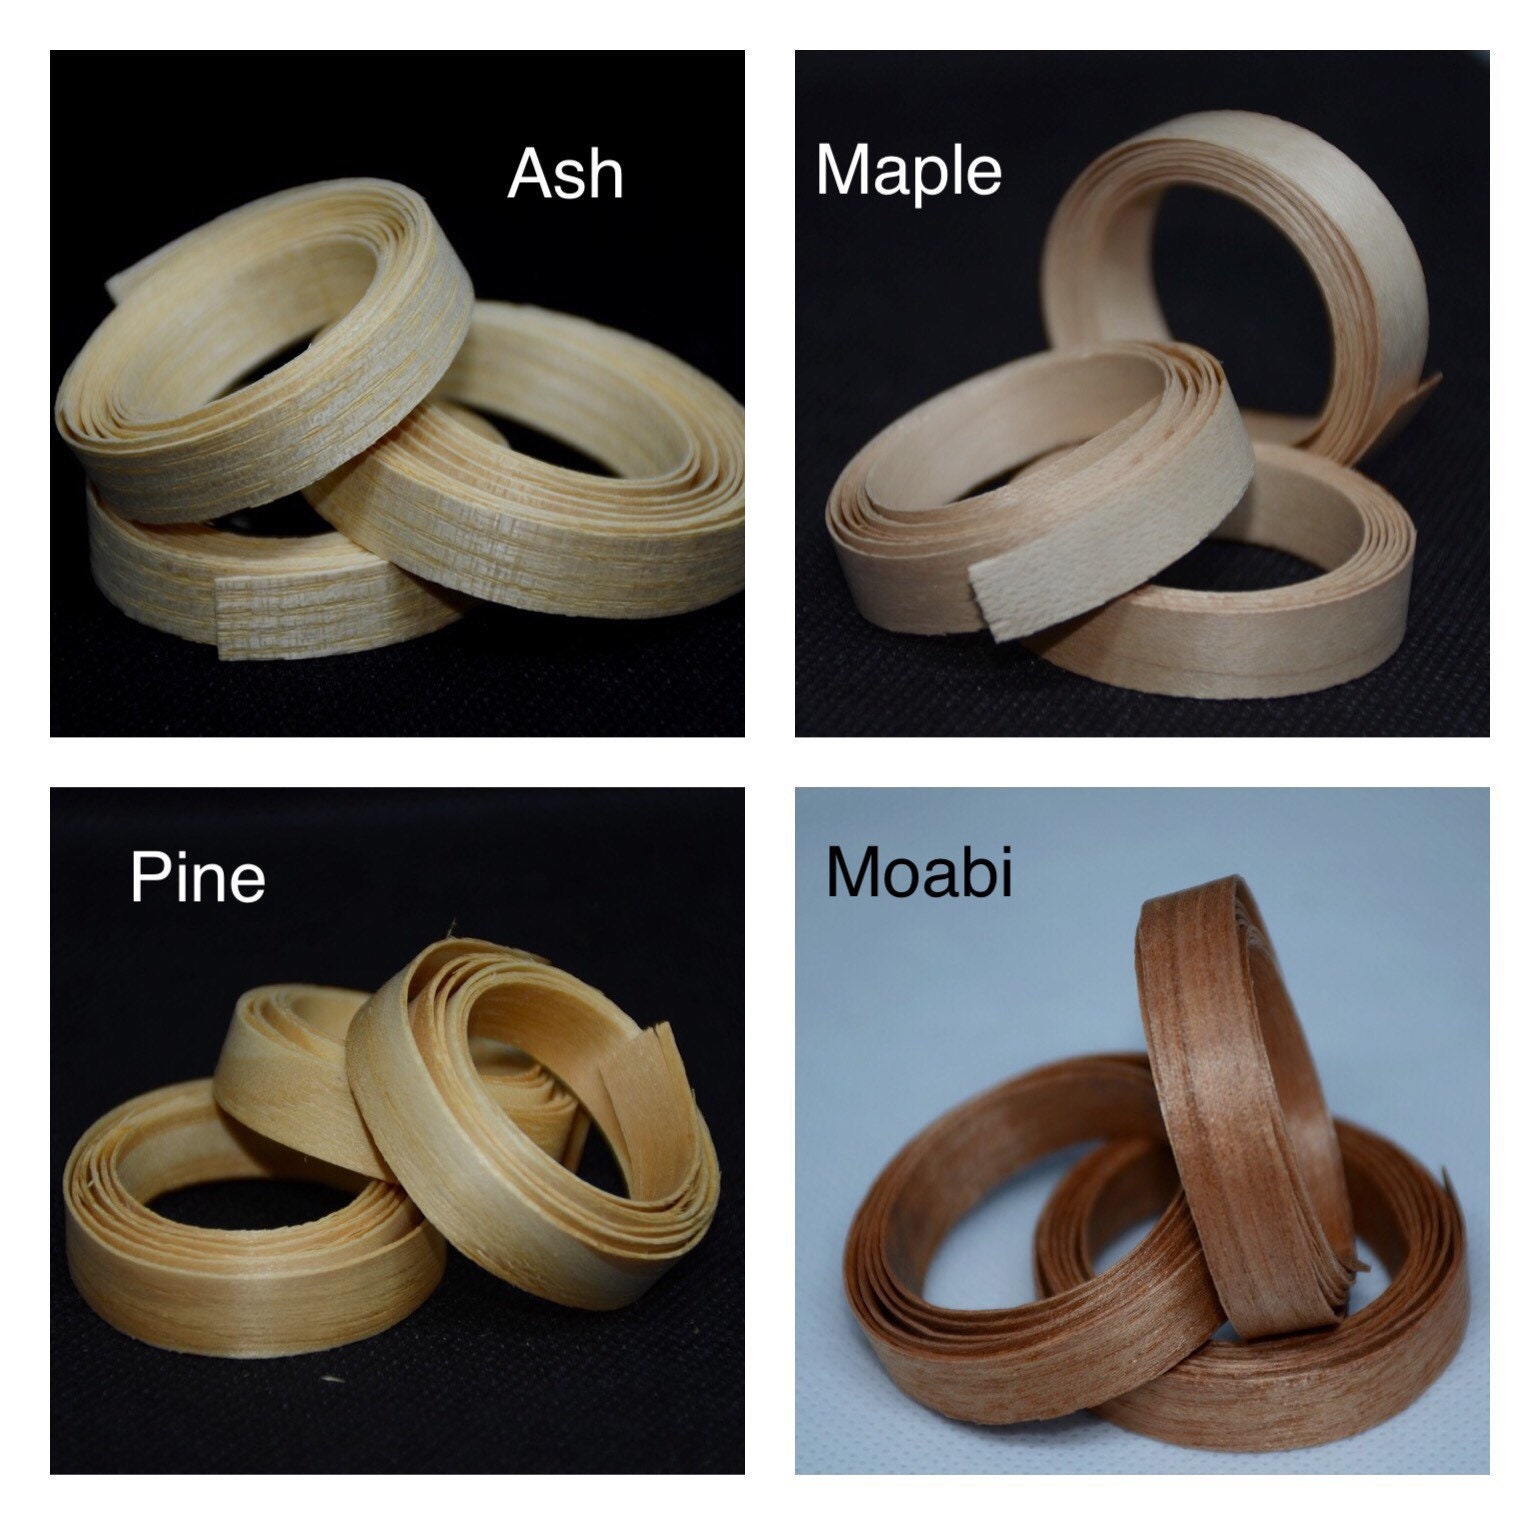 QTY 30 Wooden Rings in Various Sizes, Ring Toss, Silk Streamers, Crafts,  Bulk Pricing, Baby Rings, Natural Wood Rings, Napkin Rings 